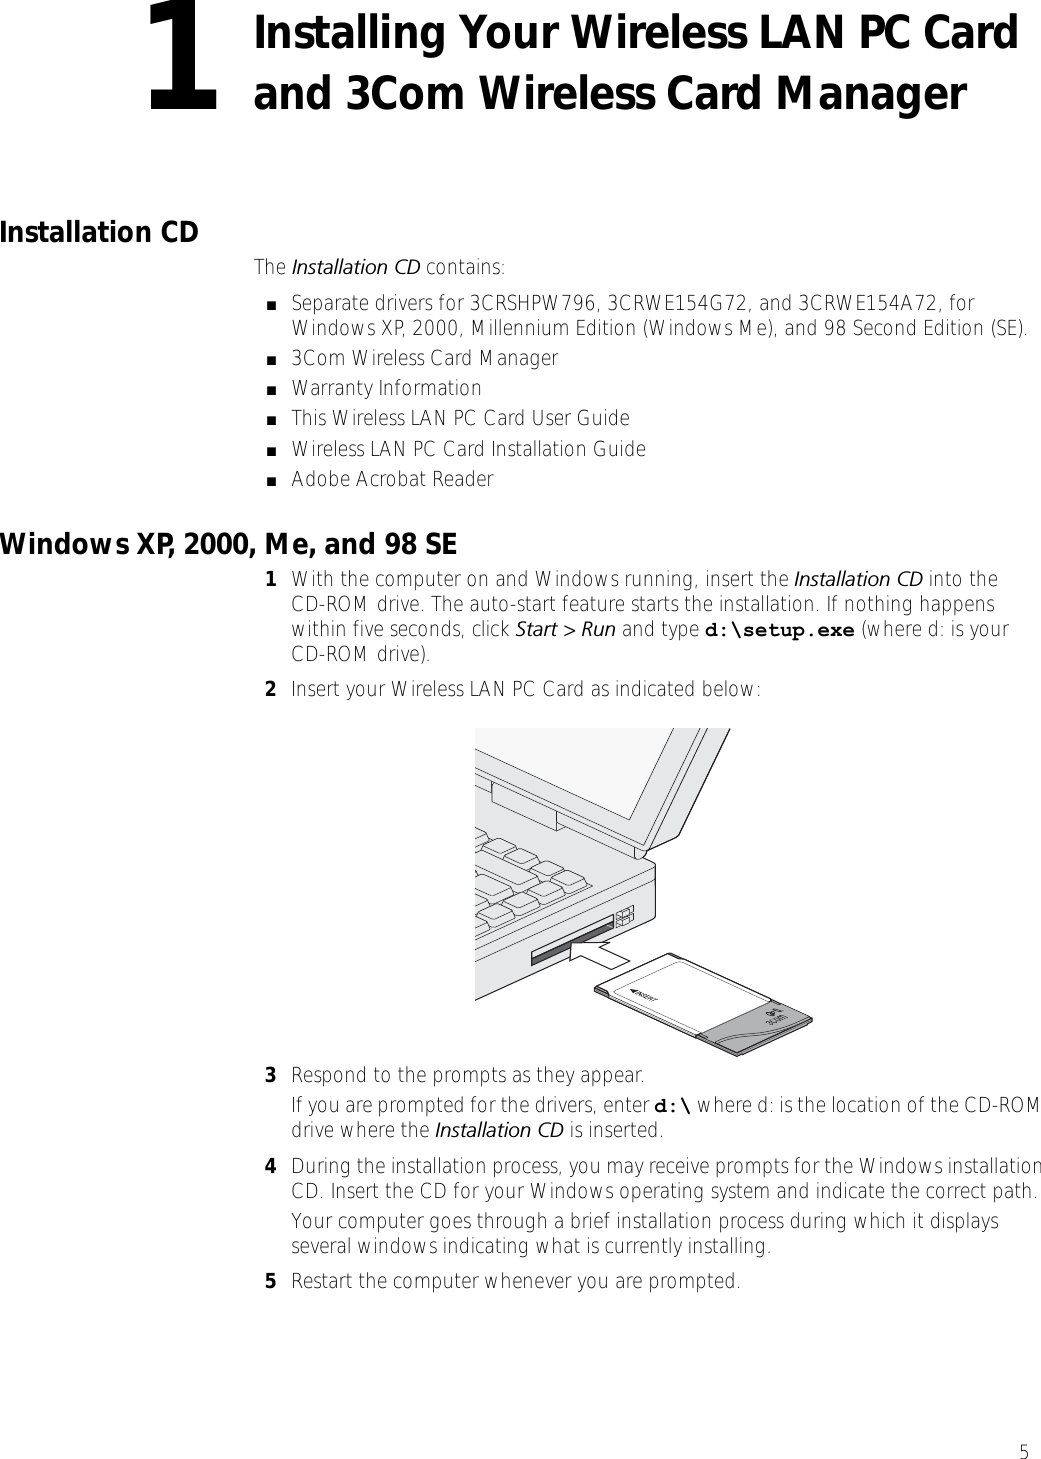 51Installing Your Wireless LAN PC Card and 3Com Wireless Card Manager Installation CD  The Installation CD contains:■Separate drivers for 3CRSHPW796, 3CRWE154G72, and 3CRWE154A72, for Windows XP, 2000, Millennium Edition (Windows Me), and 98 Second Edition (SE).■3Com Wireless Card Manager■Warranty Information■This Wireless LAN PC Card User Guide■Wireless LAN PC Card Installation Guide■Adobe Acrobat ReaderWindows XP, 2000, Me, and 98 SE1With the computer on and Windows running, insert the Installation CD into theCD-ROM drive. The auto-start feature starts the installation. If nothing happens within five seconds, click Start &gt; Run and type d:\setup.exe (where d: is your CD-ROM drive).2Insert your Wireless LAN PC Card as indicated below:3Respond to the prompts as they appear.If you are prompted for the drivers, enter d:\ where d: is the location of the CD-ROM drive where the Installation CD is inserted. 4During the installation process, you may receive prompts for the Windows installation CD. Insert the CD for your Windows operating system and indicate the correct path.Your computer goes through a brief installation process during which it displays several windows indicating what is currently installing.5Restart the computer whenever you are prompted.